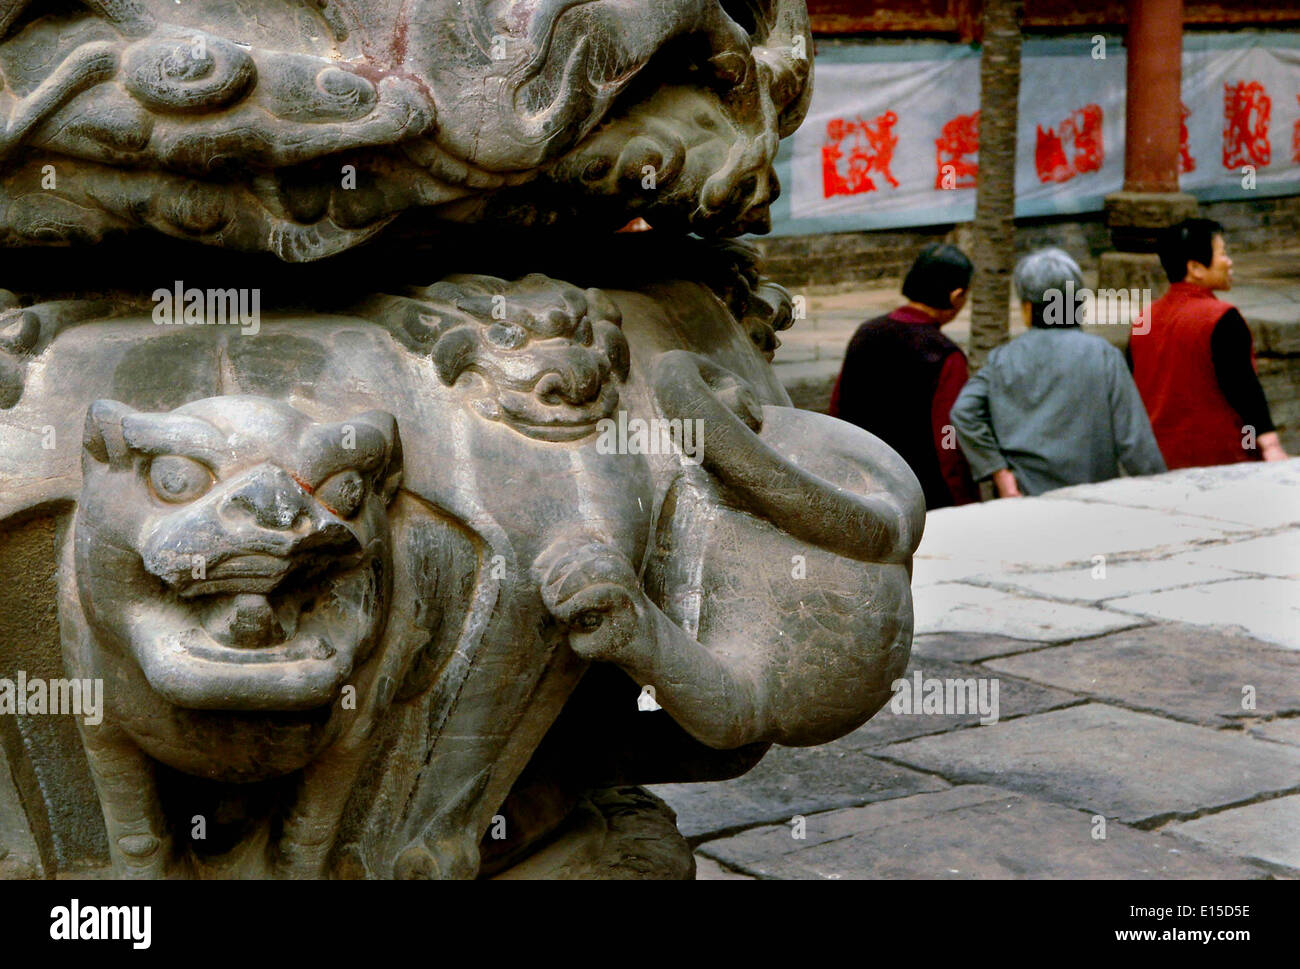 (140523) -- ZHENGZHOU, May 23, 2014 (Xinhua) -- Photo taken on April 11, 2012 shows a sculpted stone column base at the Luoyang Folklore Museum in Luoyang, central China's Henan Province. A large number of architectural sculptures have been preserved in historical sites of Henan, which is one of the cradles of the Chinese civilization. Many of the sculptures, created from stones, bricks, or wood, were used as building parts of residences, shrines and memorial archways, among other architecture types. Underlining both the mood and the details, these sculptures have themes including daily life, Stock Photo